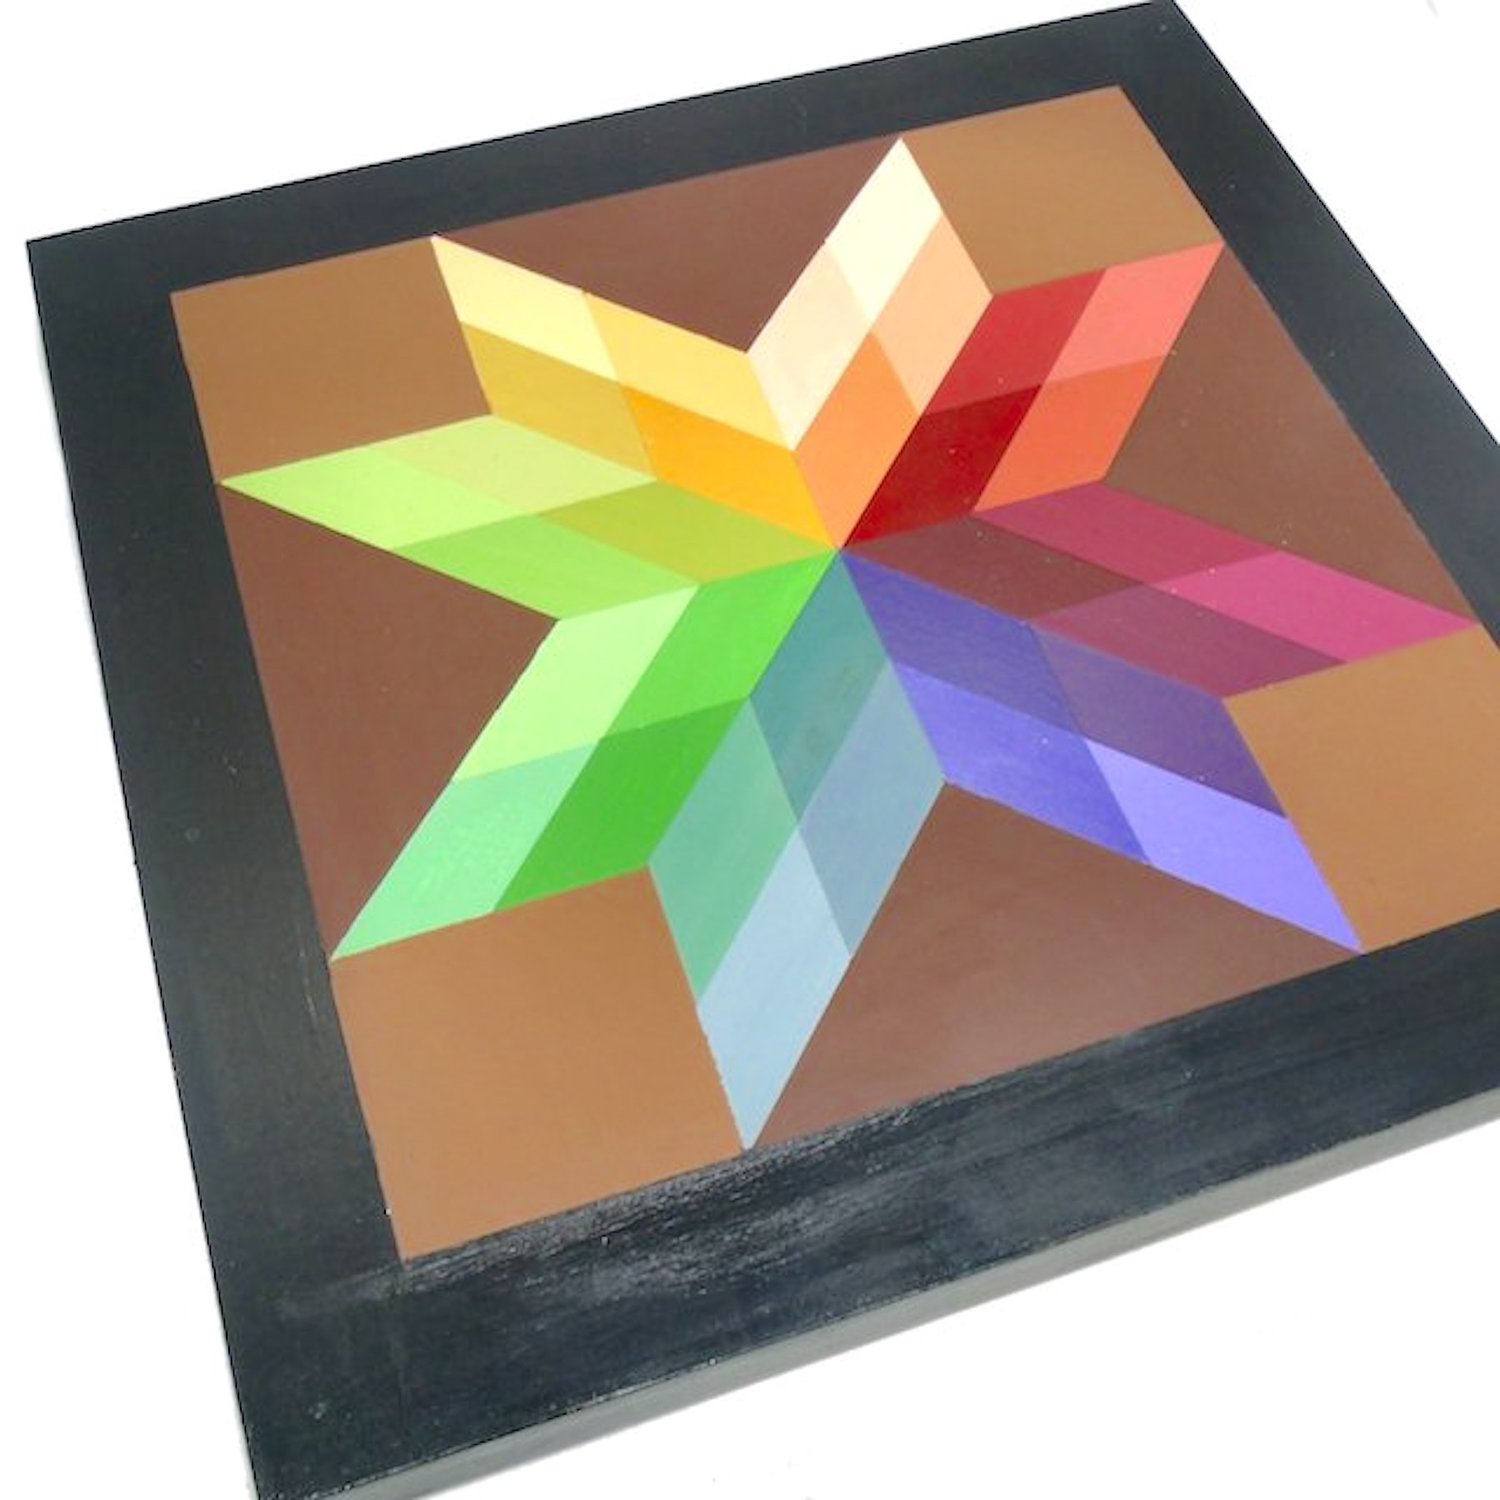 Barn Quilt Painting workshop will be held Thursday, Sept. 22, from 1 to 4 p.m.